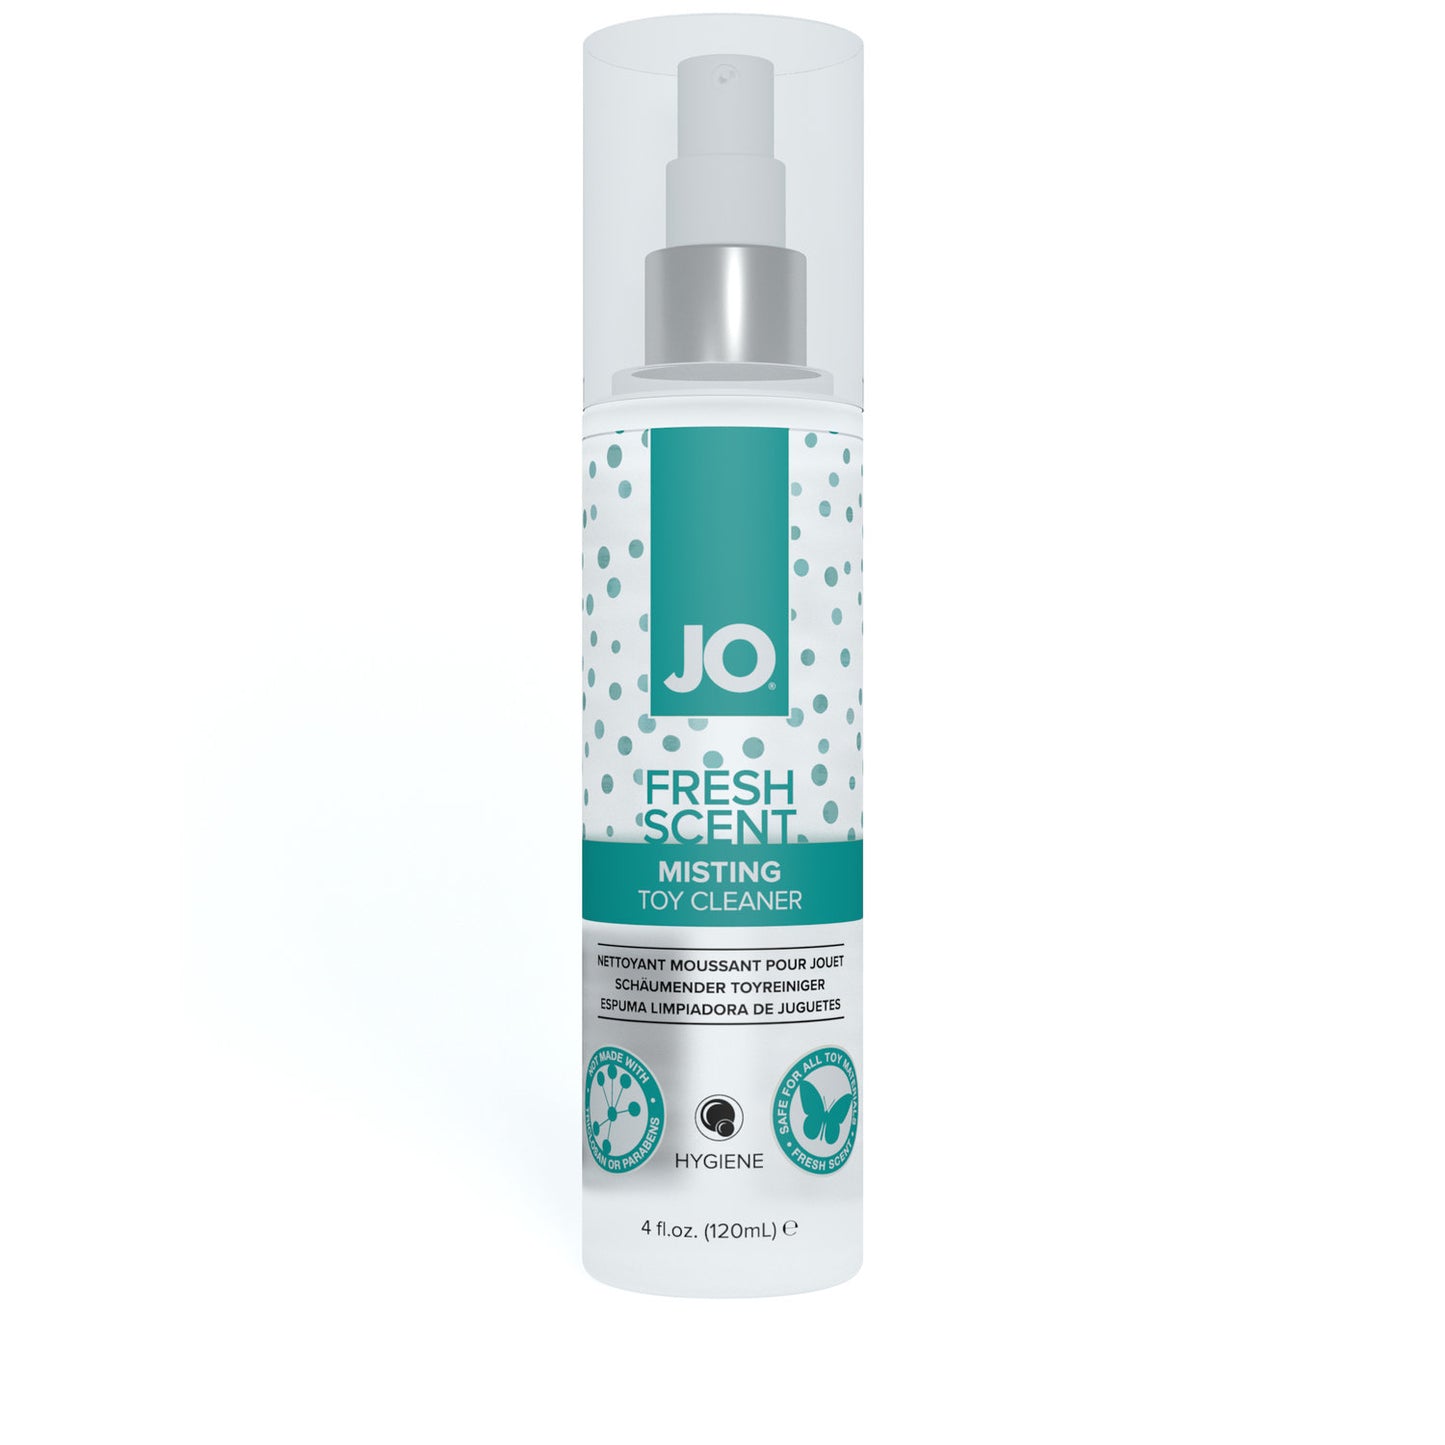 Photo of the front of the bottle for the System JO Misting Toy Cleaner in Fresh Scent (4oz).